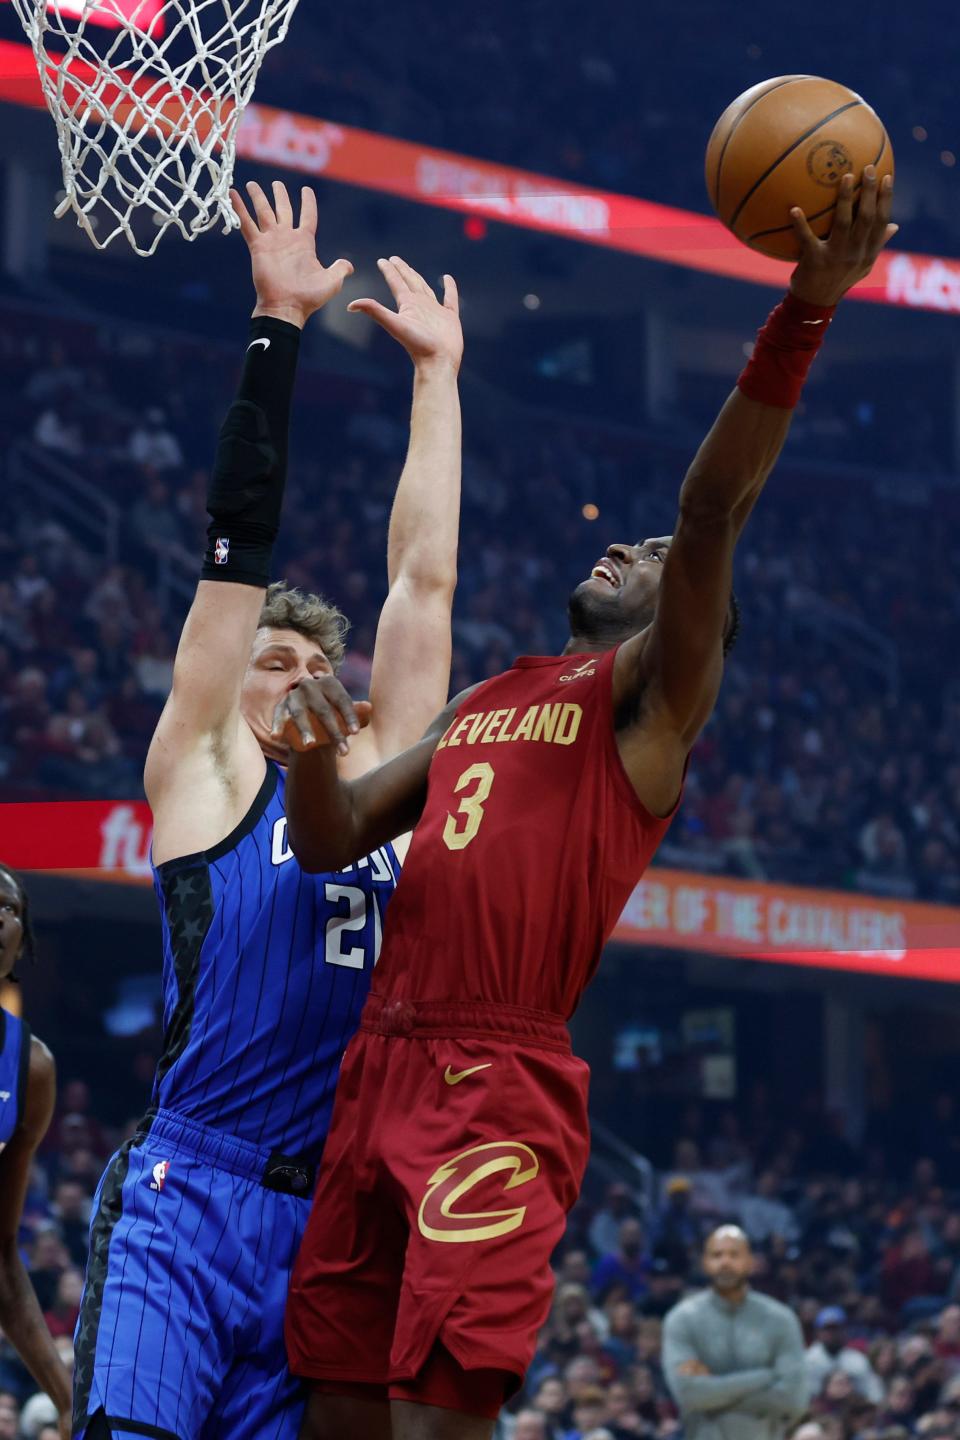 Cleveland Cavaliers guard Caris LeVert (3) shoots against Orlando Magic center Moritz Wagner (21) during the first half of an NBA basketball game Friday, Dec. 2, 2022, in Cleveland. (AP Photo/Ron Schwane)